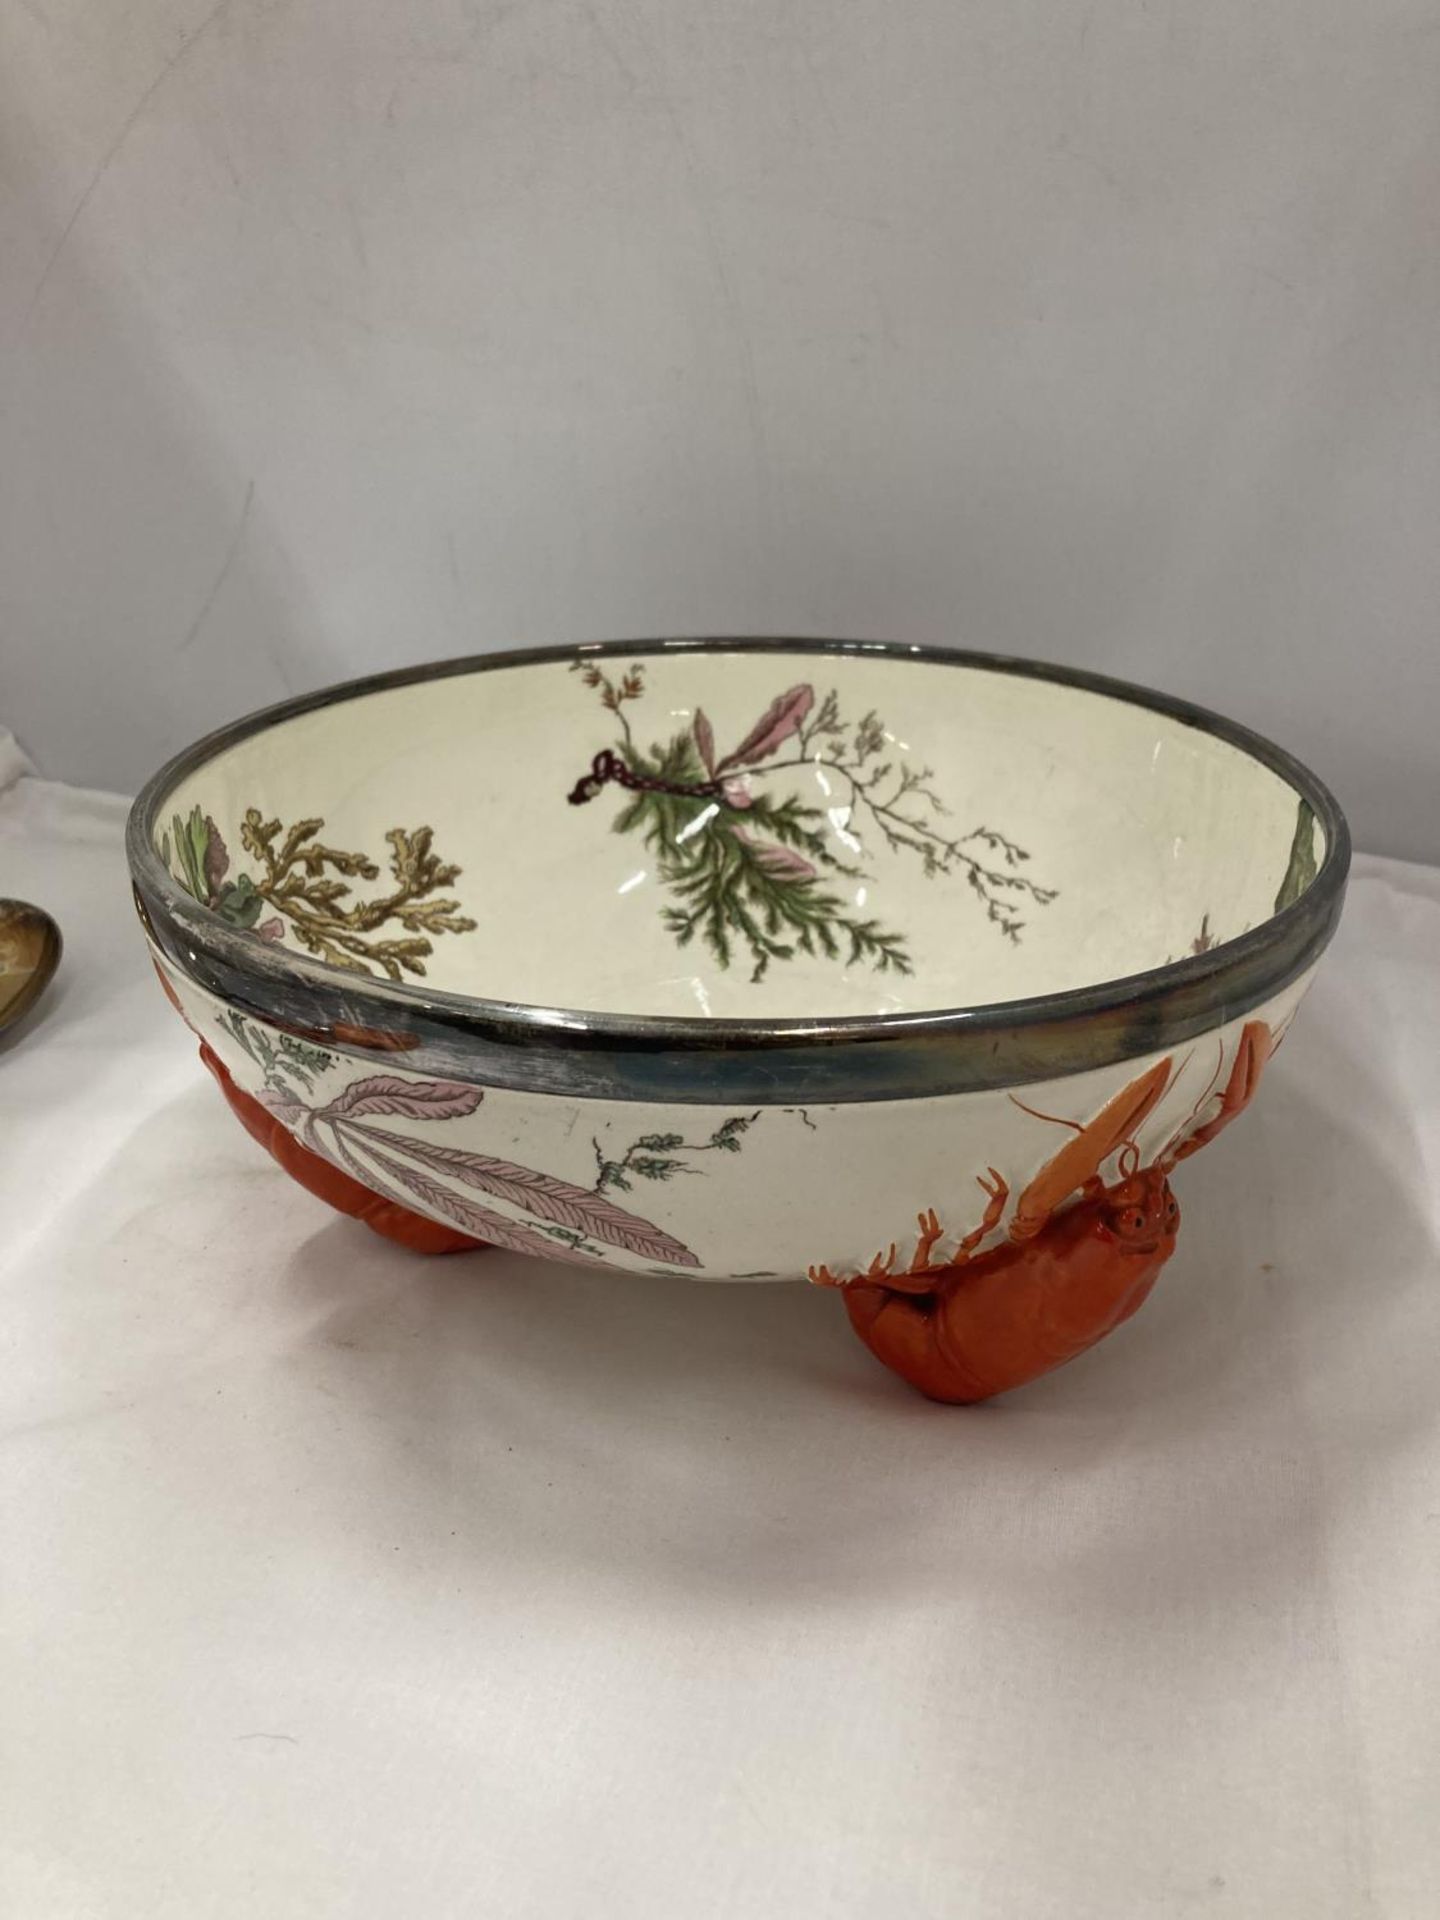 A VICTORIAN WEDGWOOD MAJOLICA SALAD BOWL WITH LOBSTER FEET AND MATCHING SILVER PLATED SERVERS - Image 2 of 7